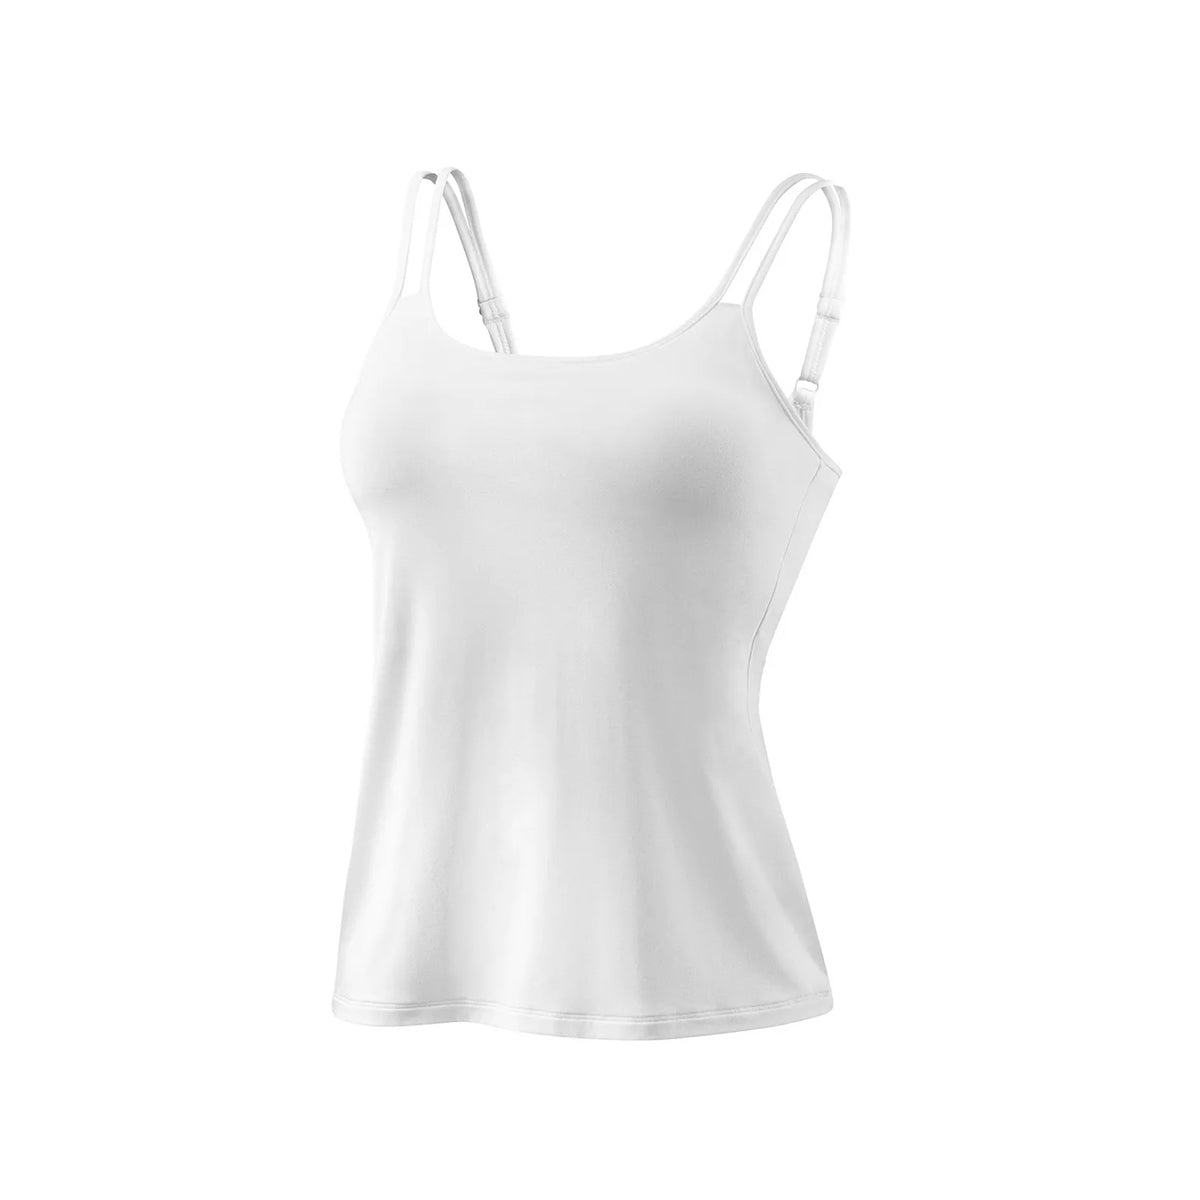 Buy NanoEdge Present Camisole Bralette for Women Deep Cross Back Cami  Wireless Crop Top Size (28 Till 32) White Color Pack of 1 at